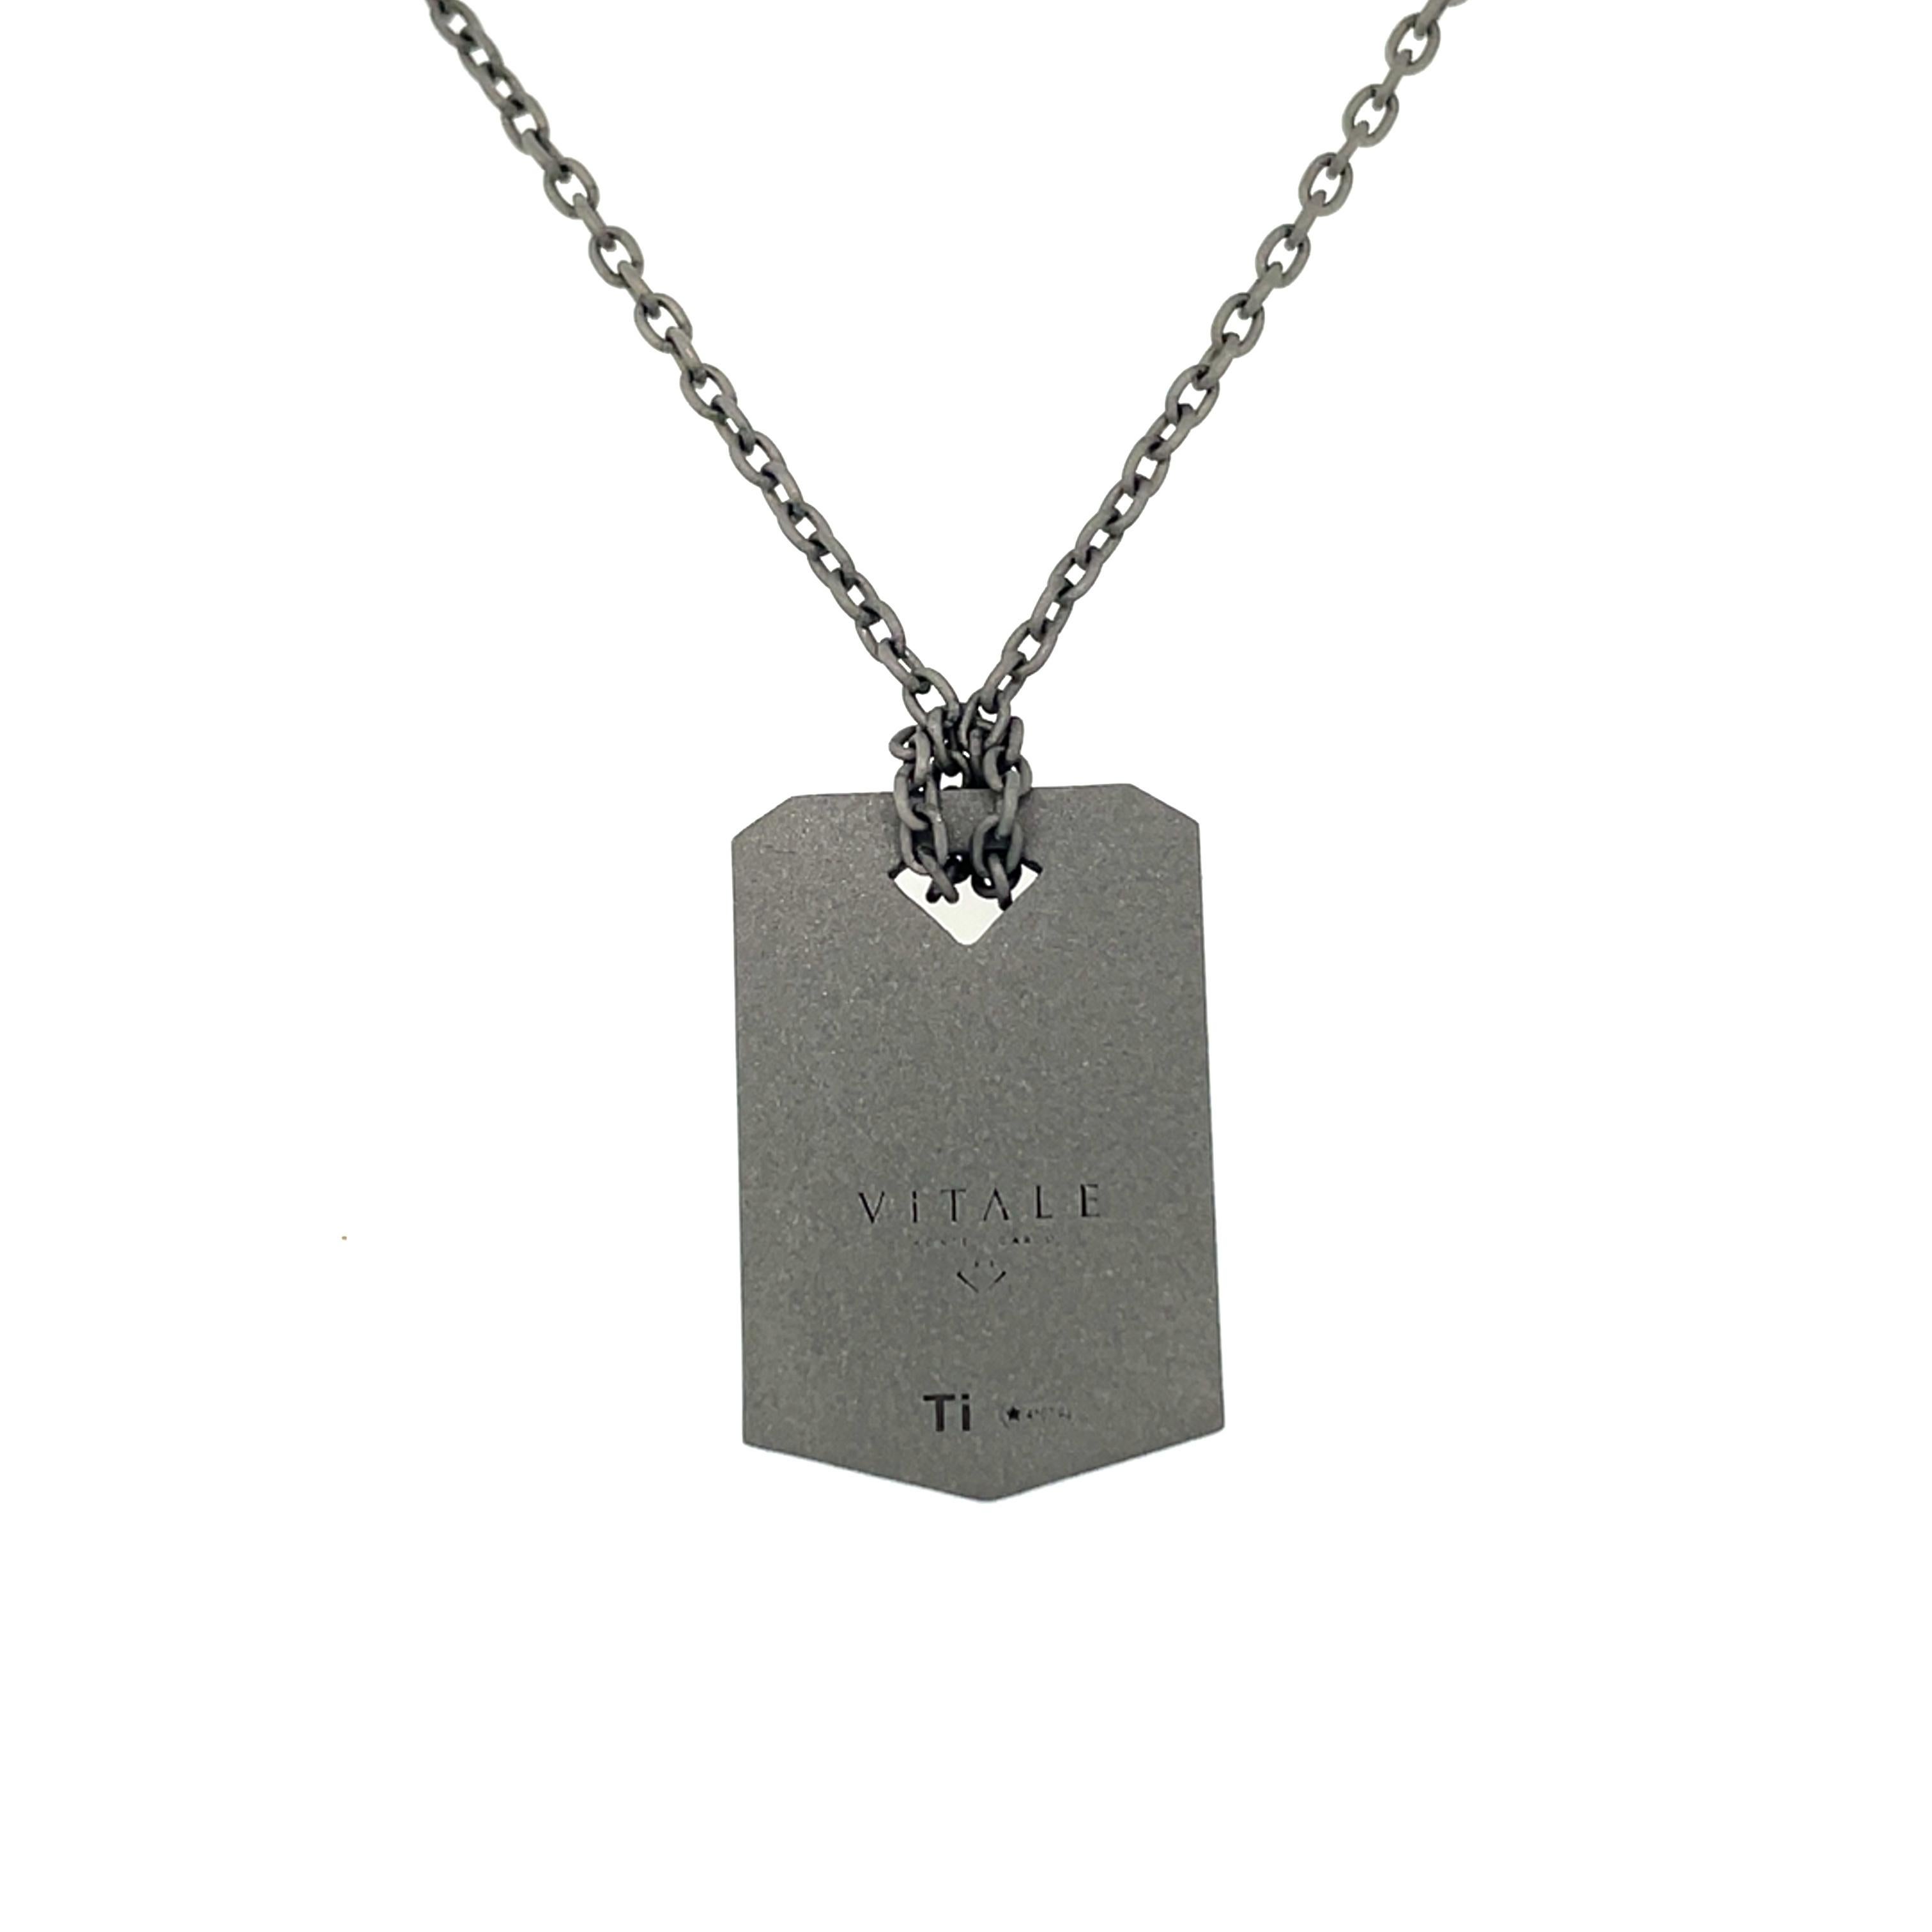 Contemporary Men's Titanium Brown Diamond Pendant - Personalized Engraving with 3 Initials  For Sale